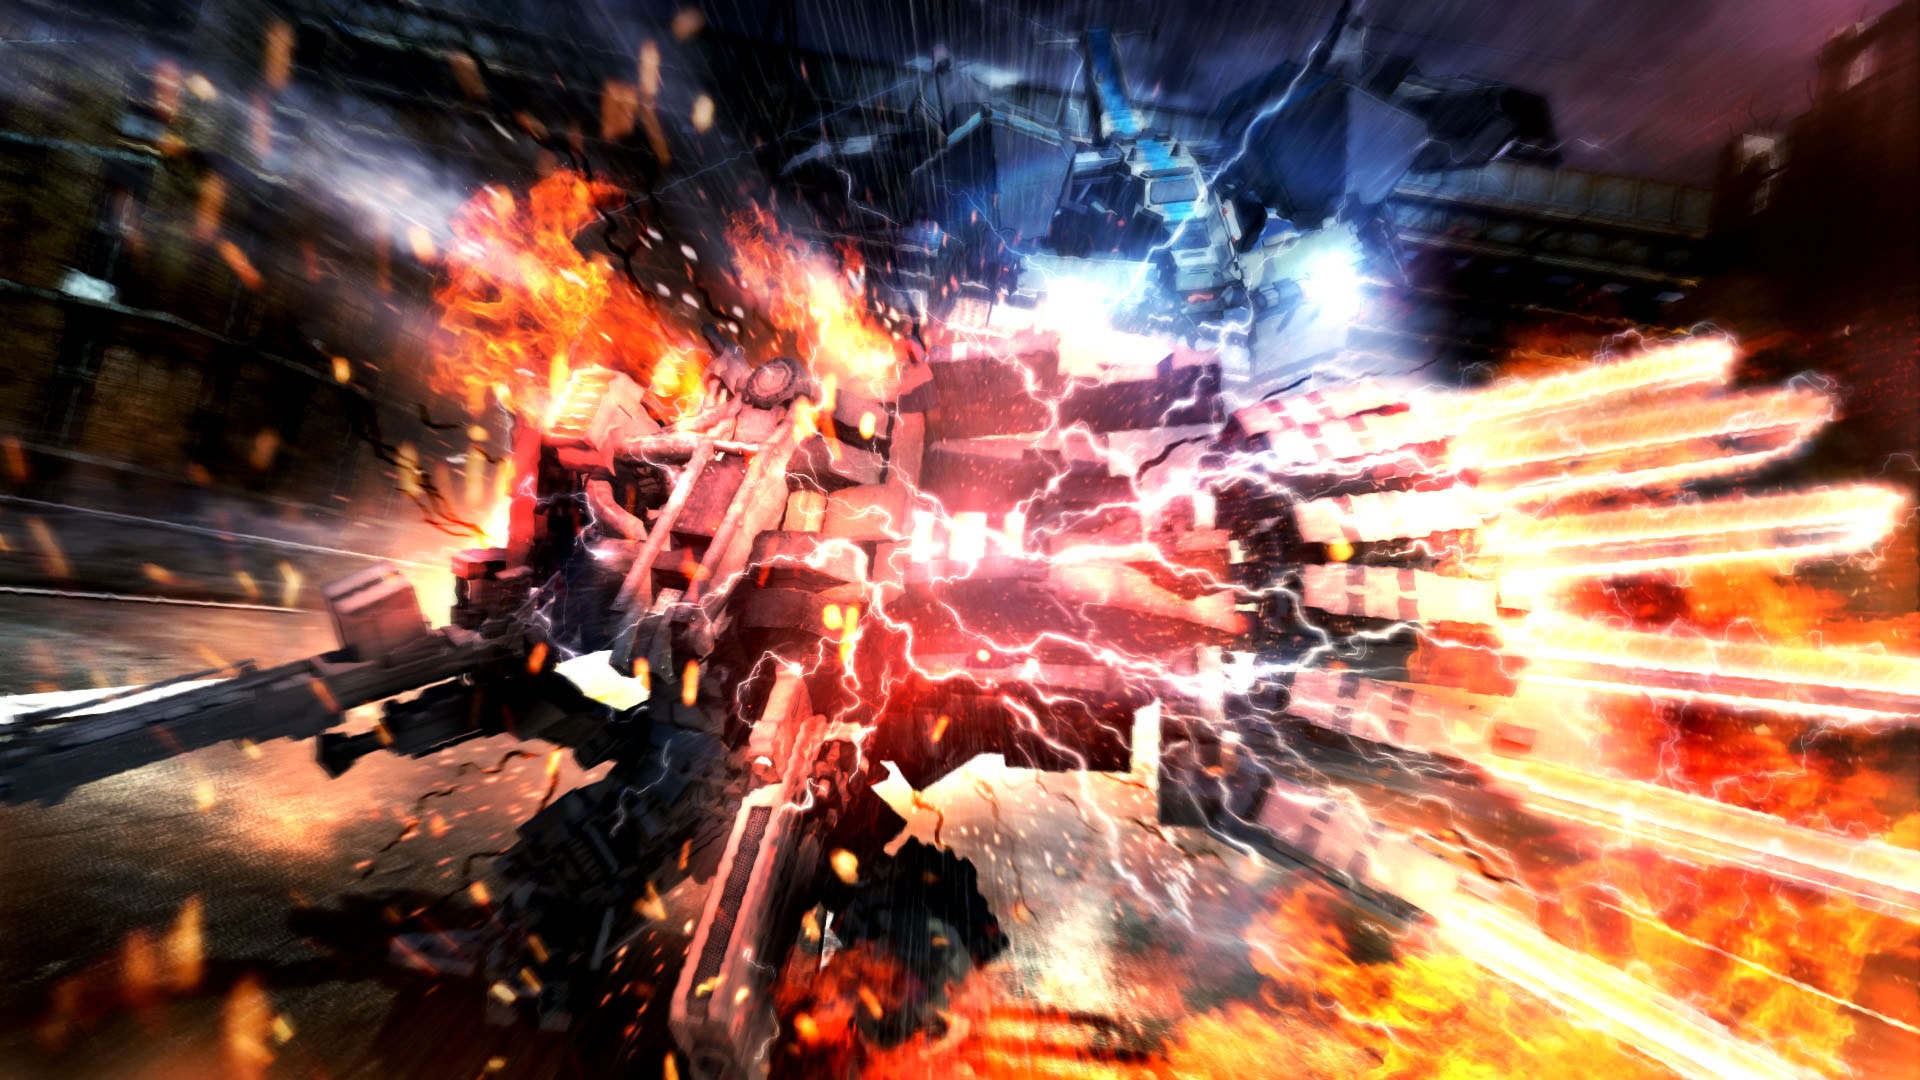 Download This Wallpaper - Armored Core , HD Wallpaper & Backgrounds